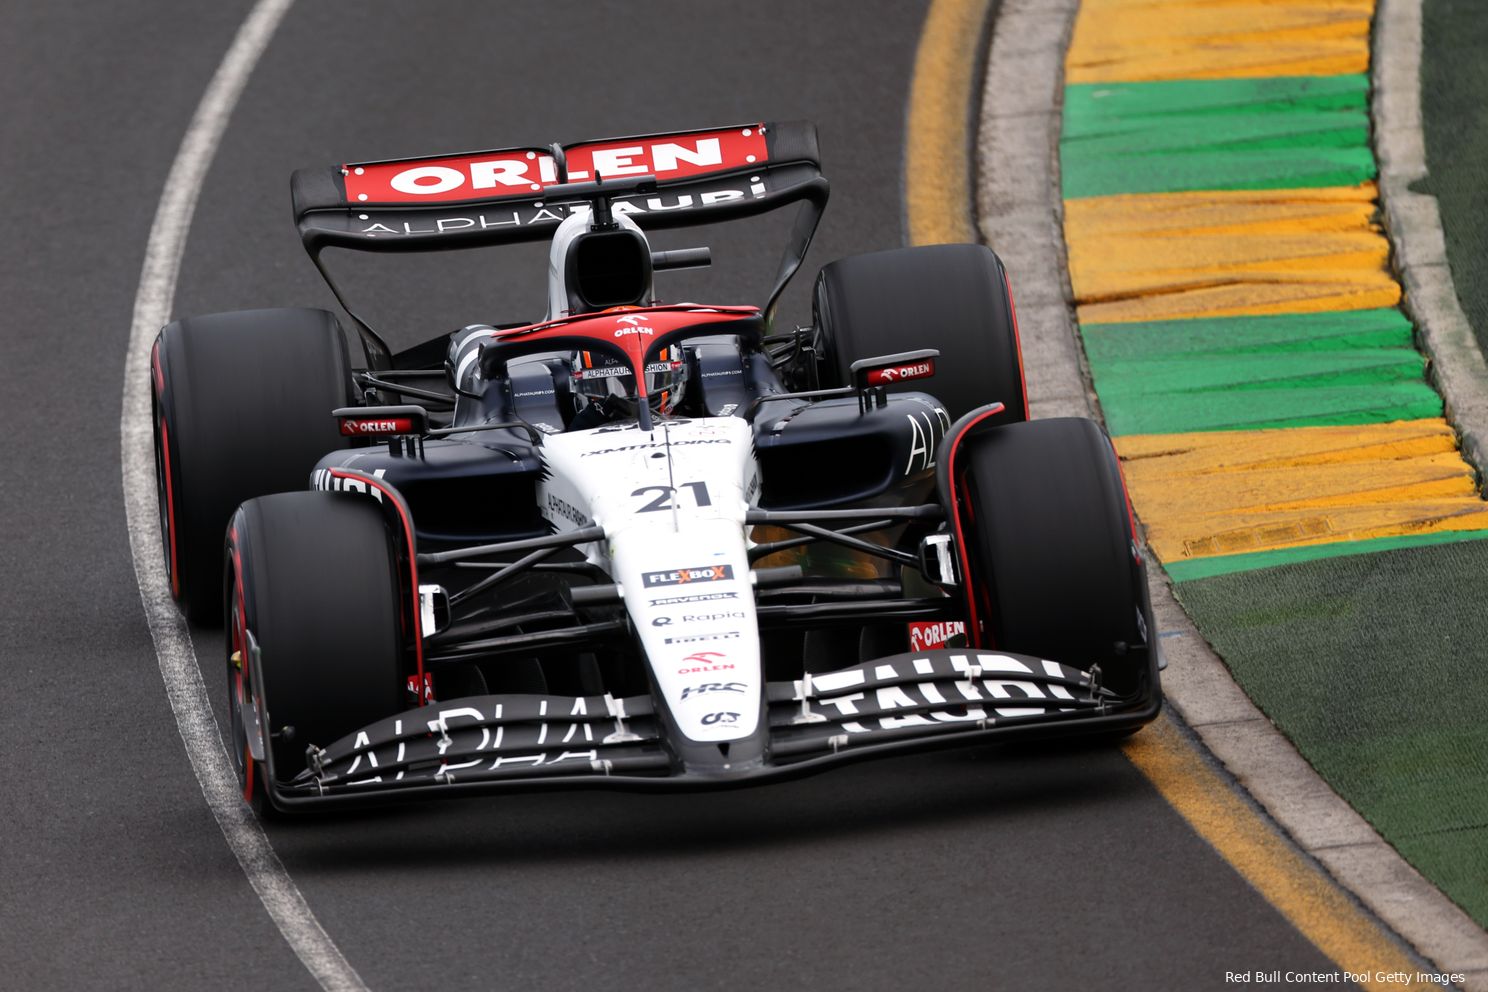 Nyck de Vries in action during qualifying for the Australian Grand Prix.